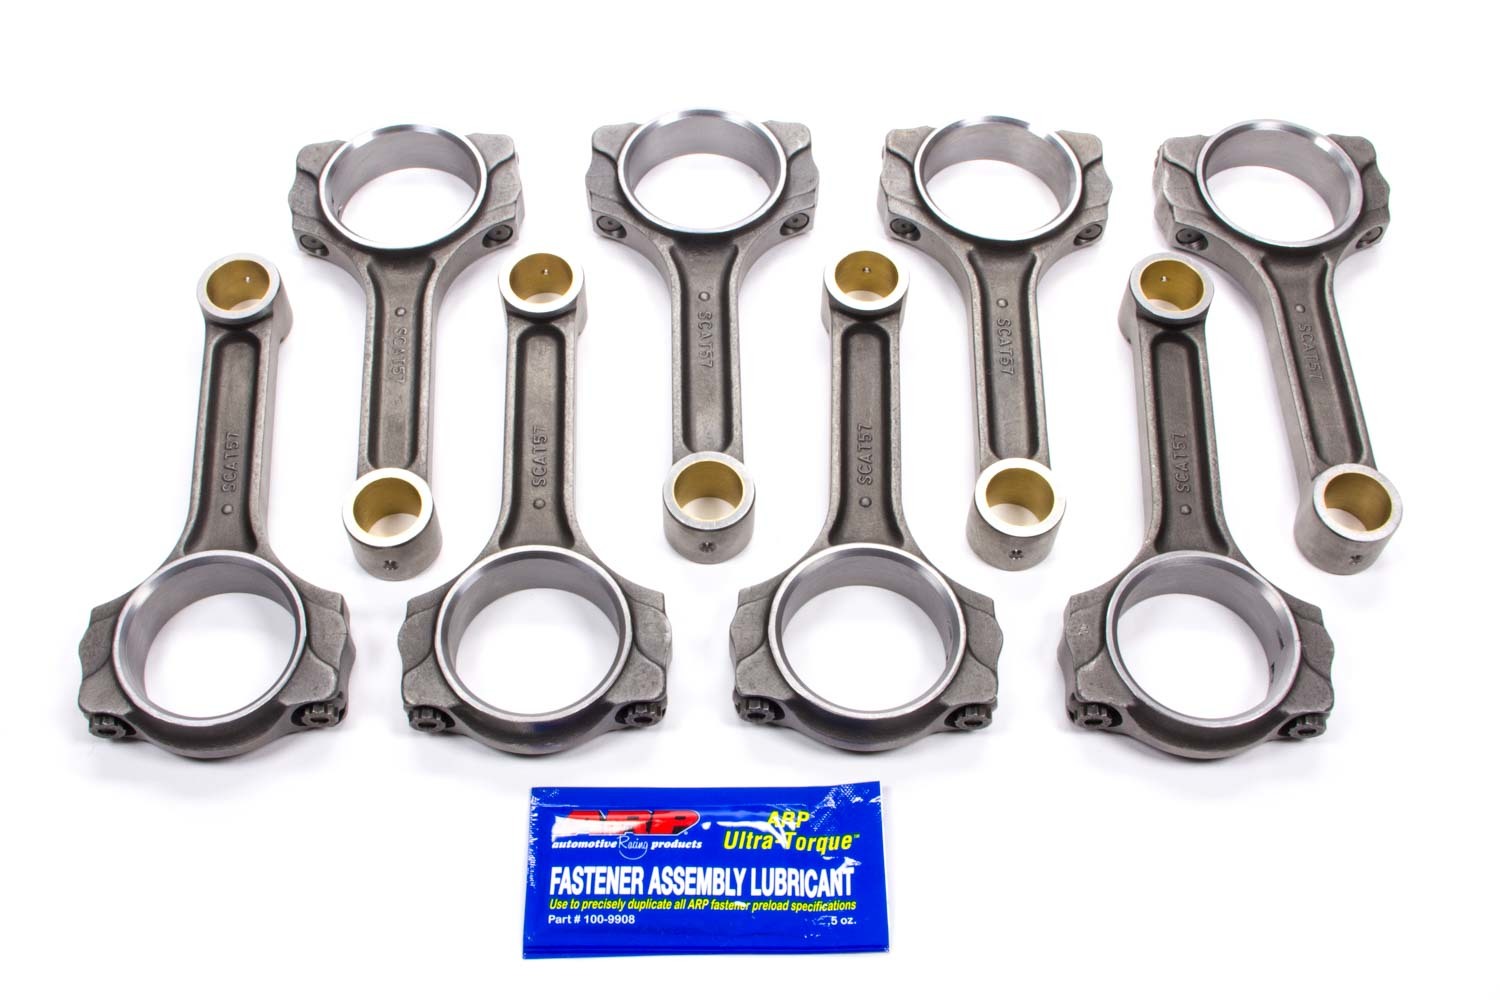 Scat 2-ICR6700-7/16 - Connecting Rod, Pro Comp, I Beam, 6.700 in Long, Bushed, 7/16 in Cap Screws, ARP8740, Forged Steel, Big Block Chevy, Set of 8